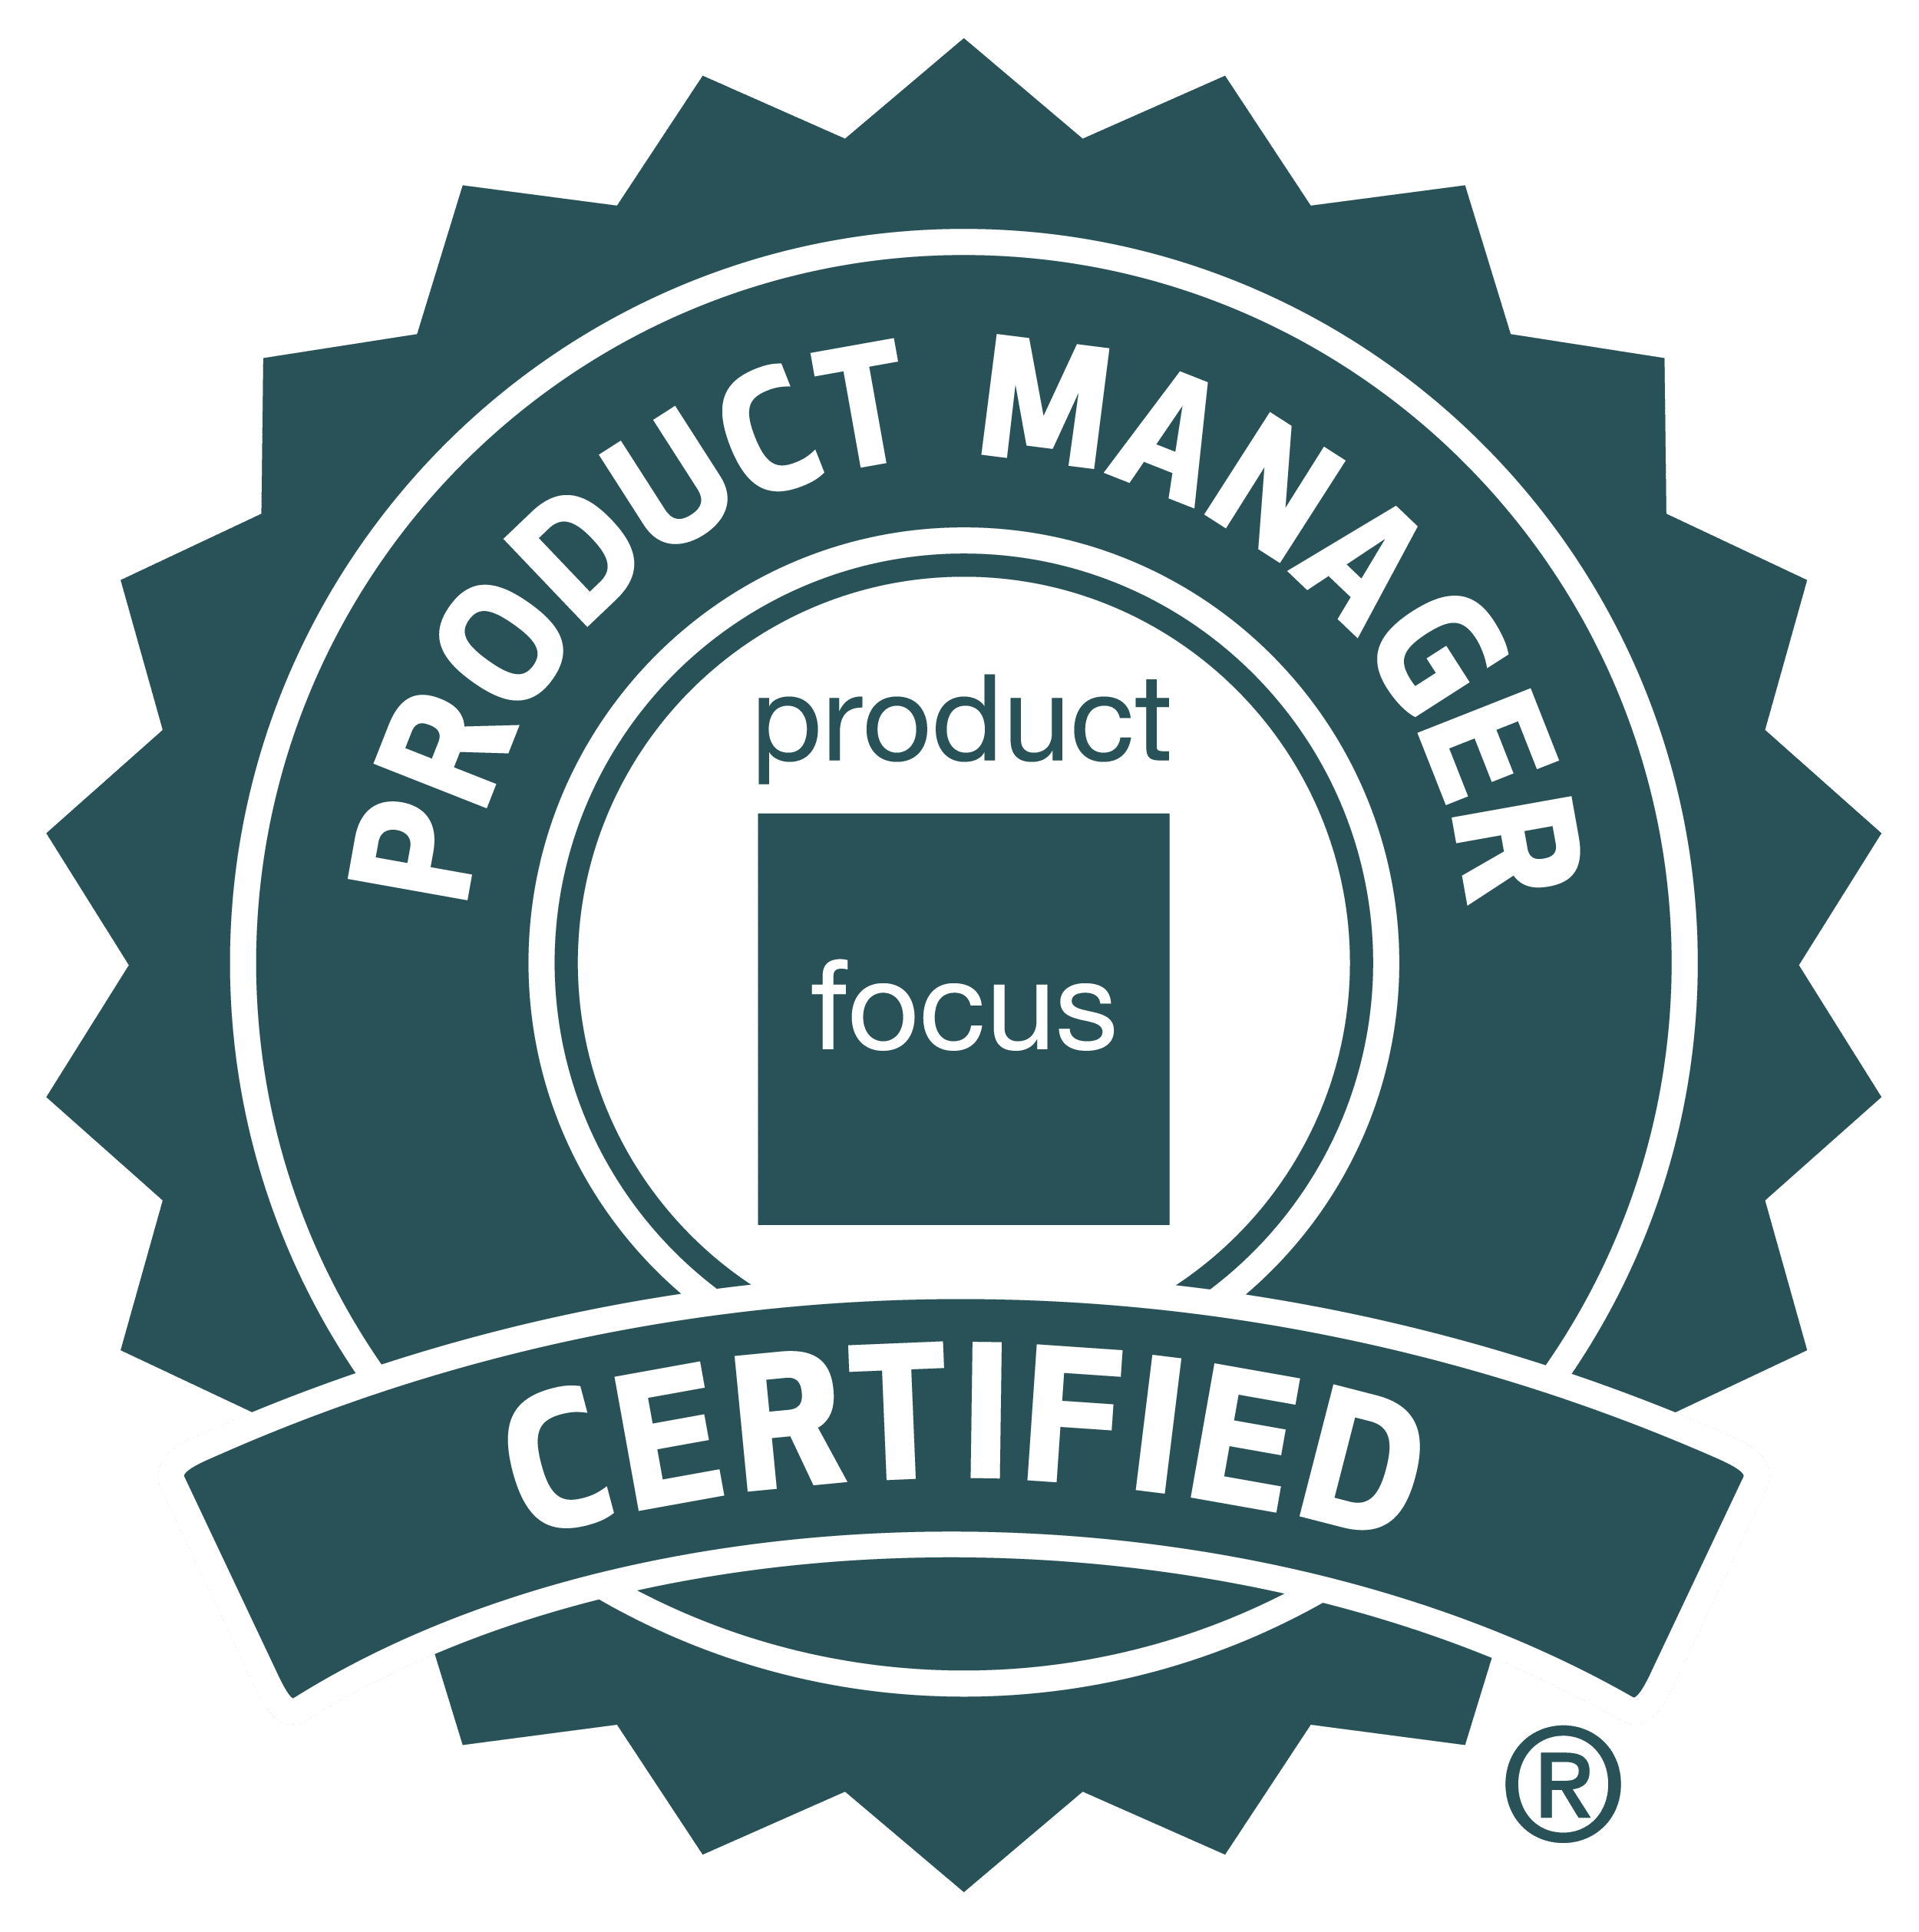 Product Focus certified logo